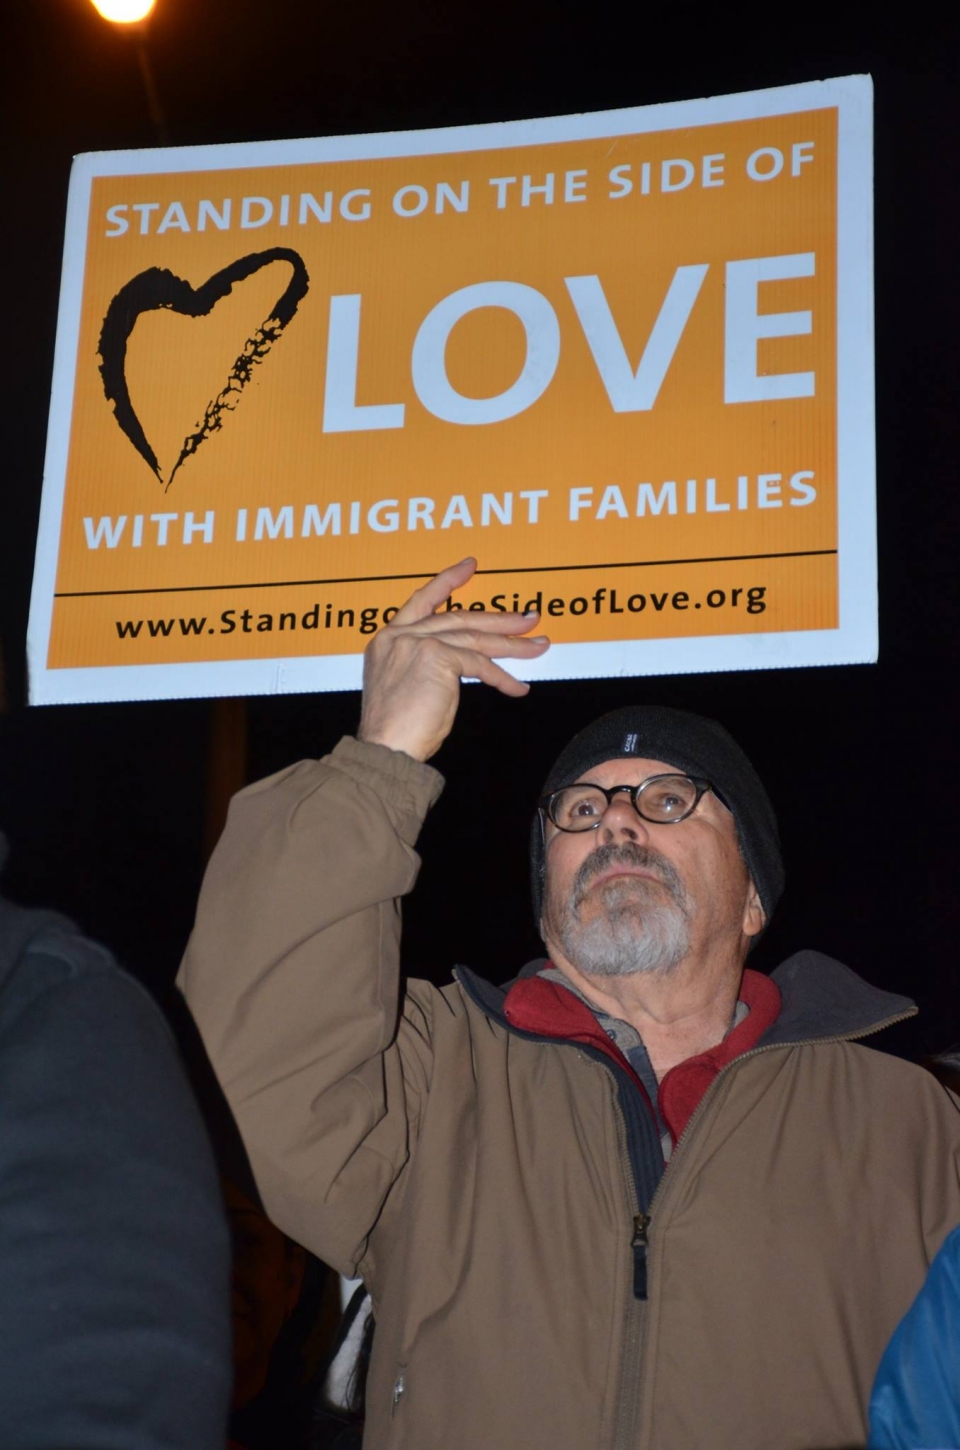 More than 150 community members gathered for our February vigil at the GEO detention center.